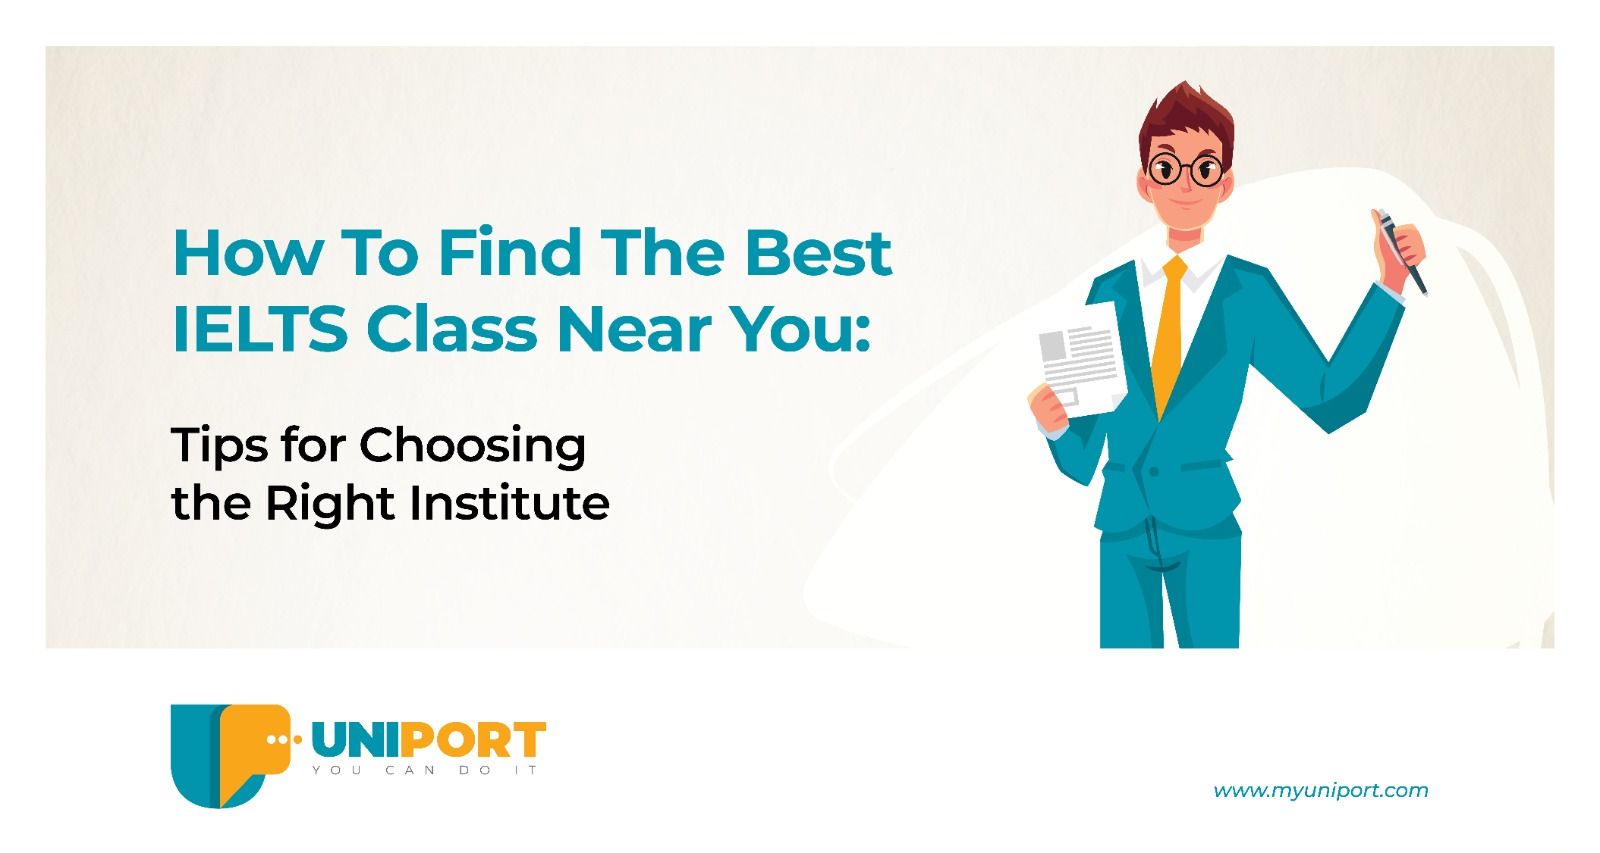 How To Find The Best IELTS Class Near You: Tips For Choosing The Right Institute